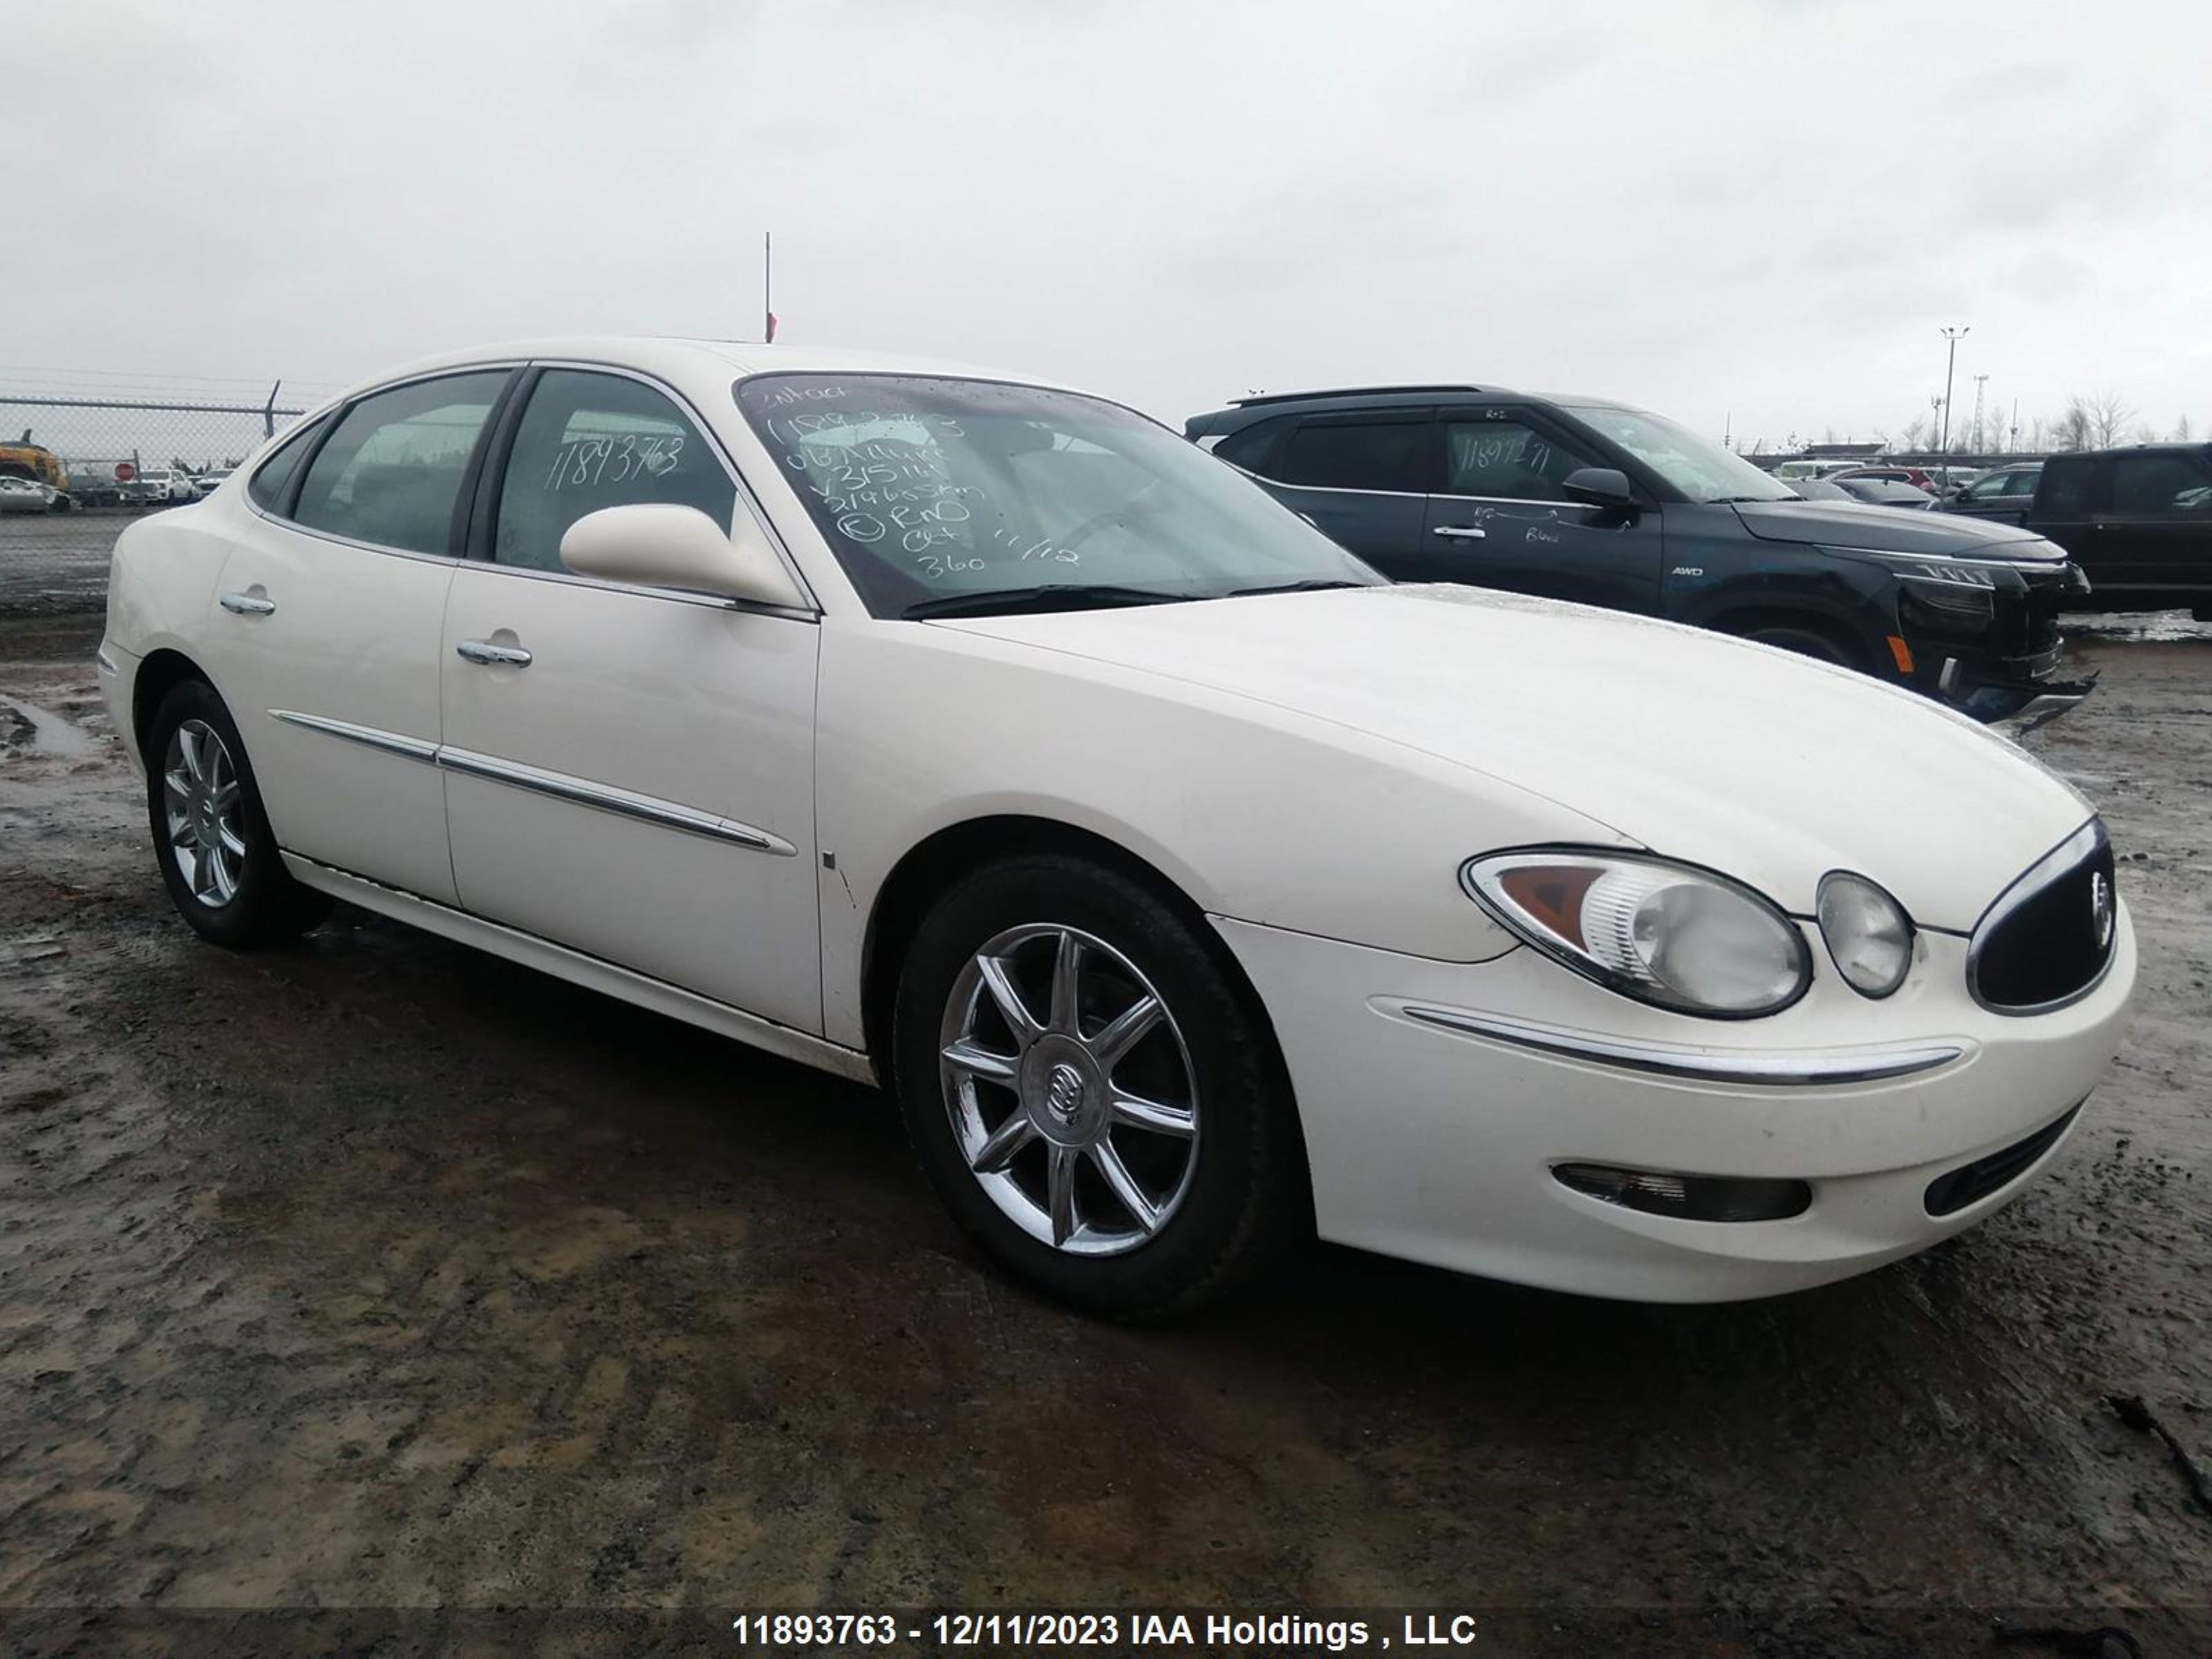 VIN: 2G4WH587561315161 - buick allure